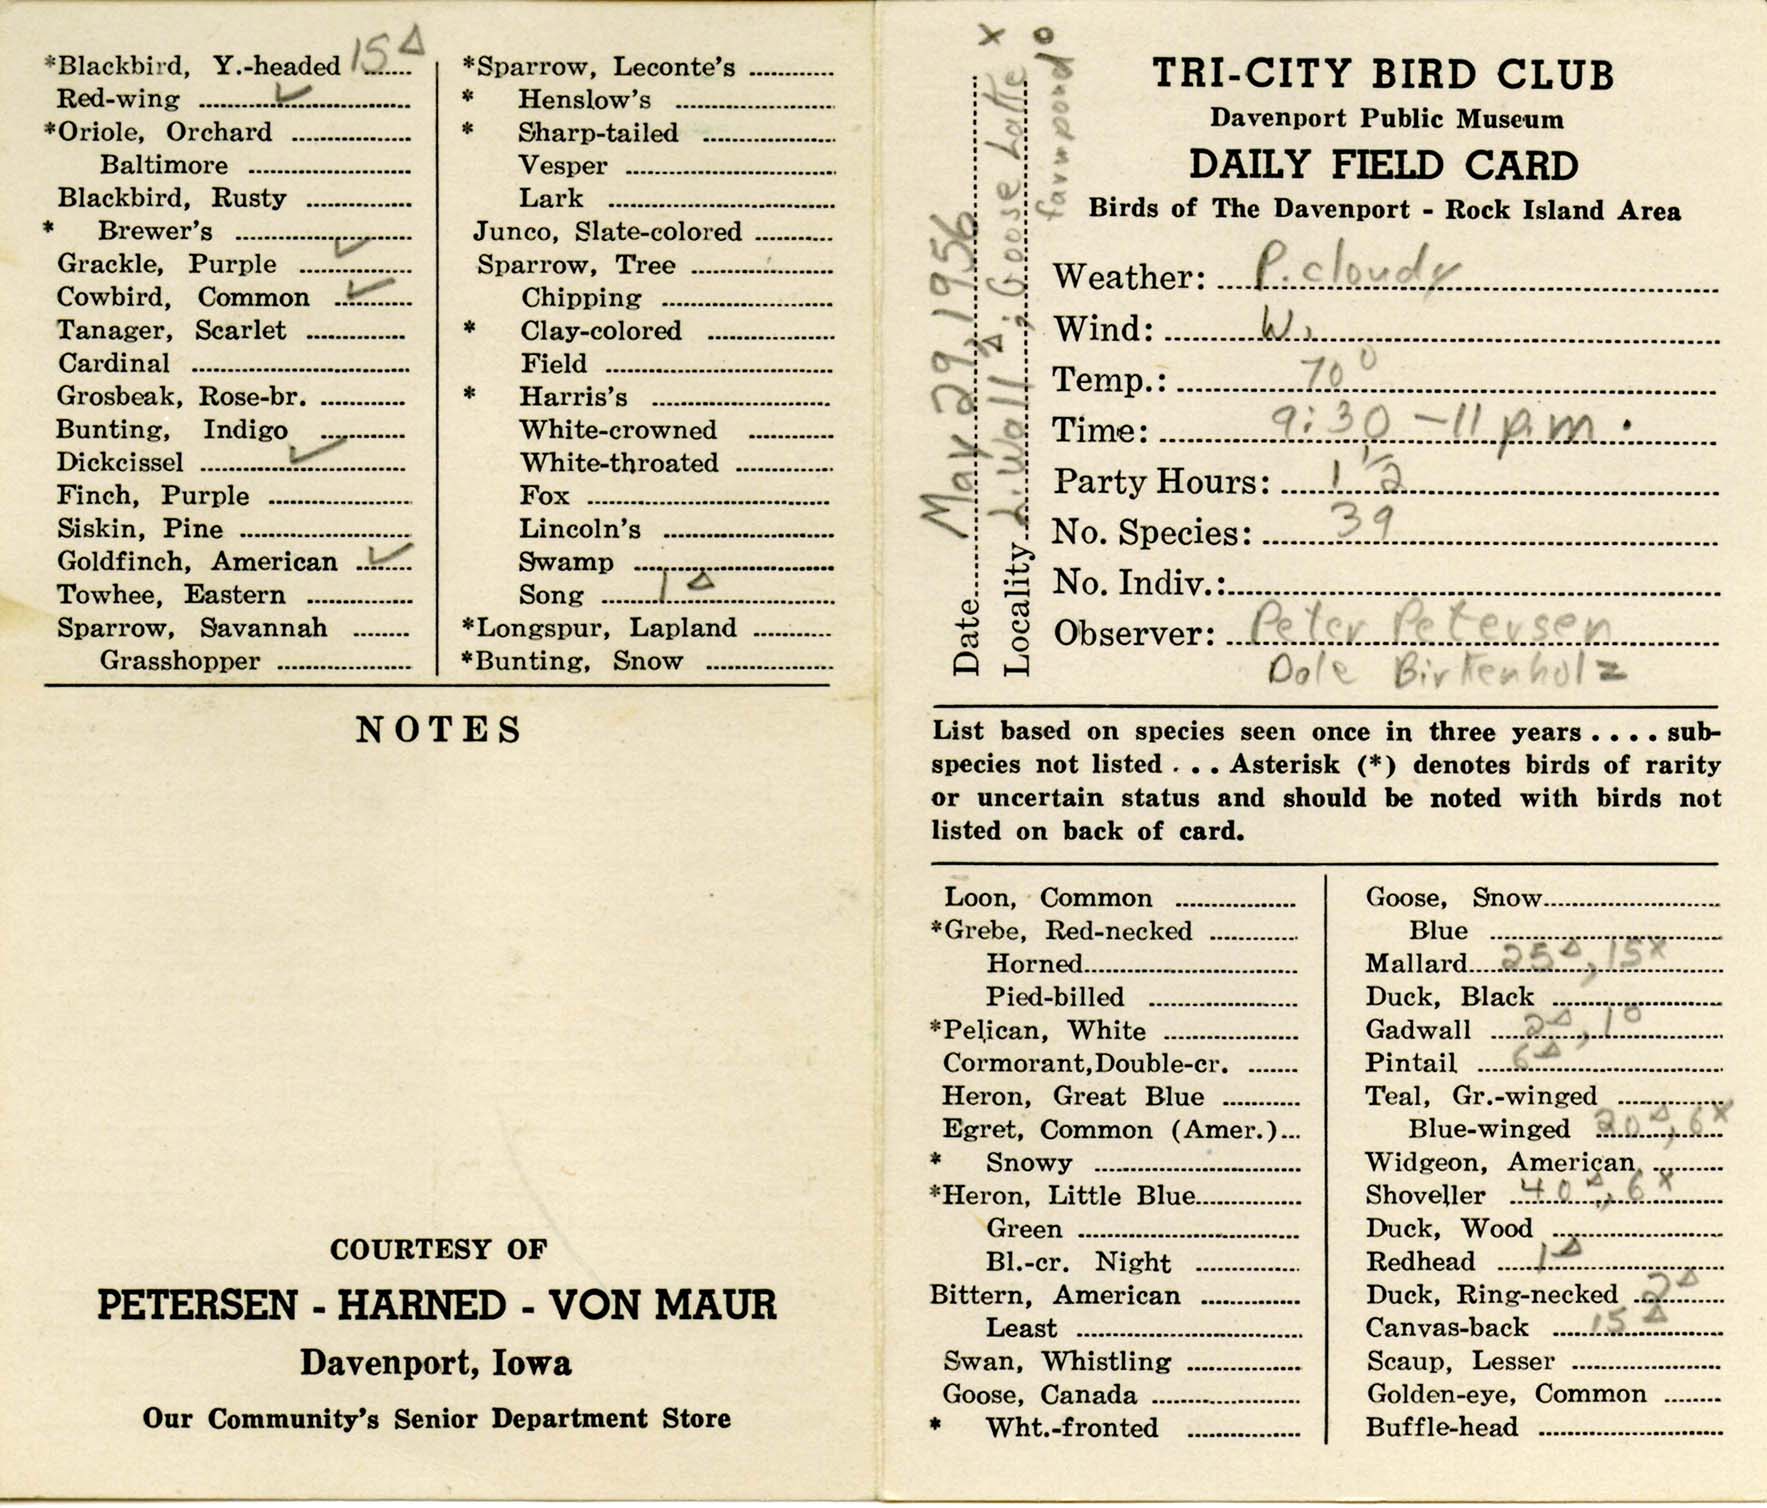 Tri-city Bird Club daily field card compiled by Peter C. Petersen and Dale Birkenholz, May 29, 1956